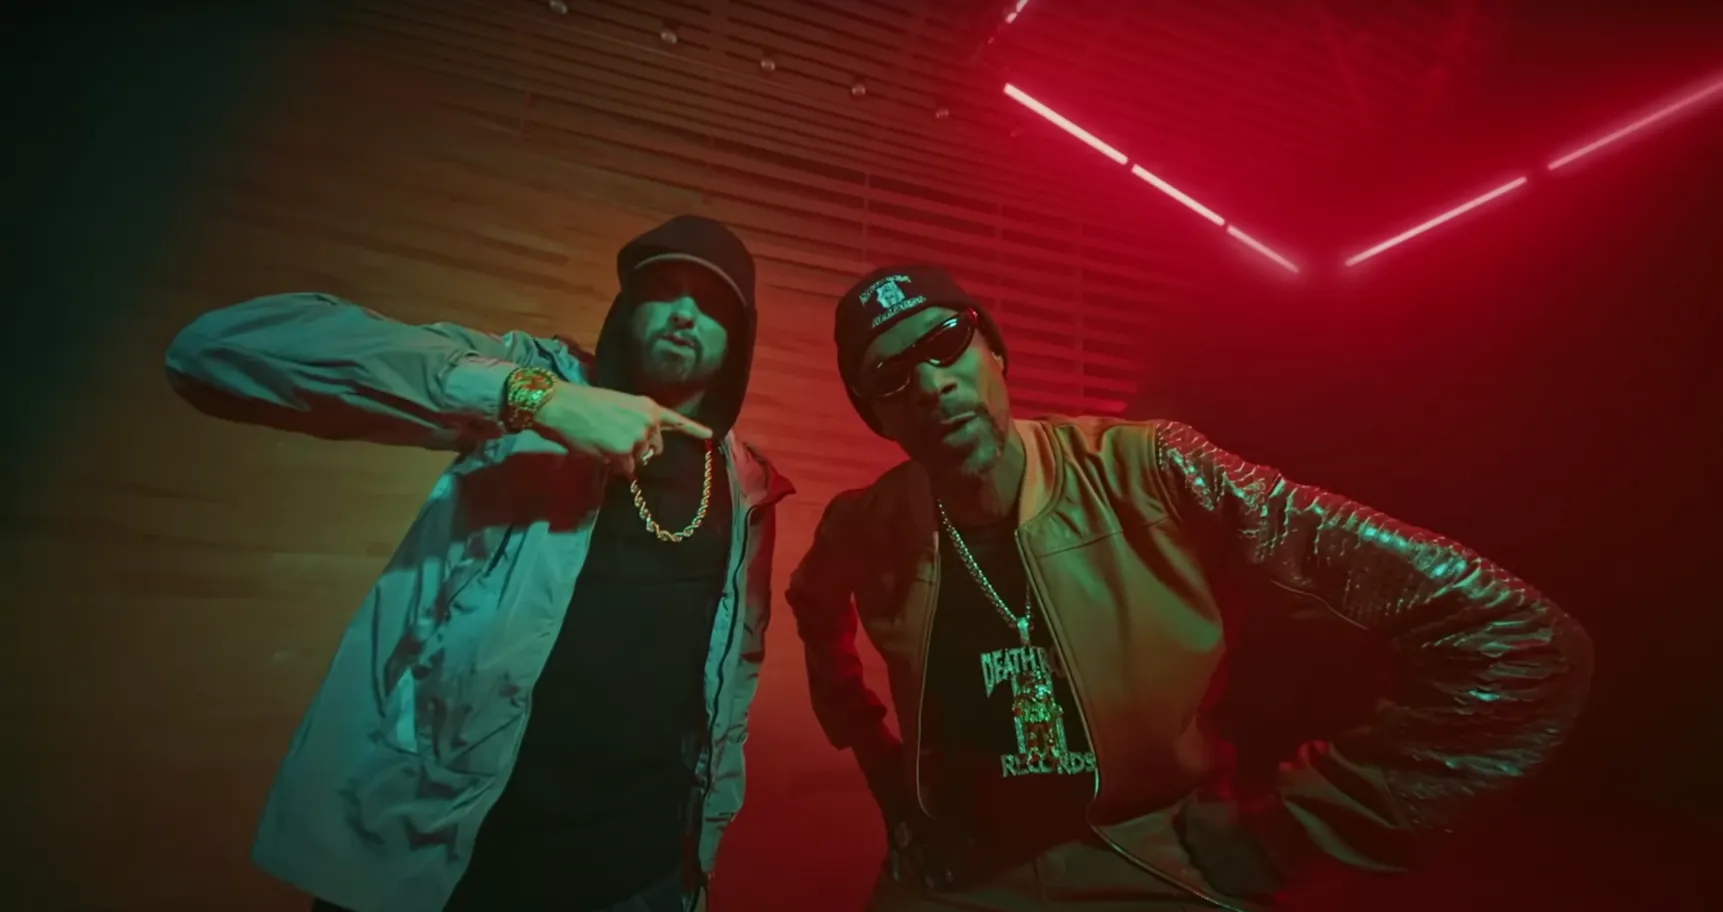 Snoop Dogg and Eminem rapping with green and red lighting in background.